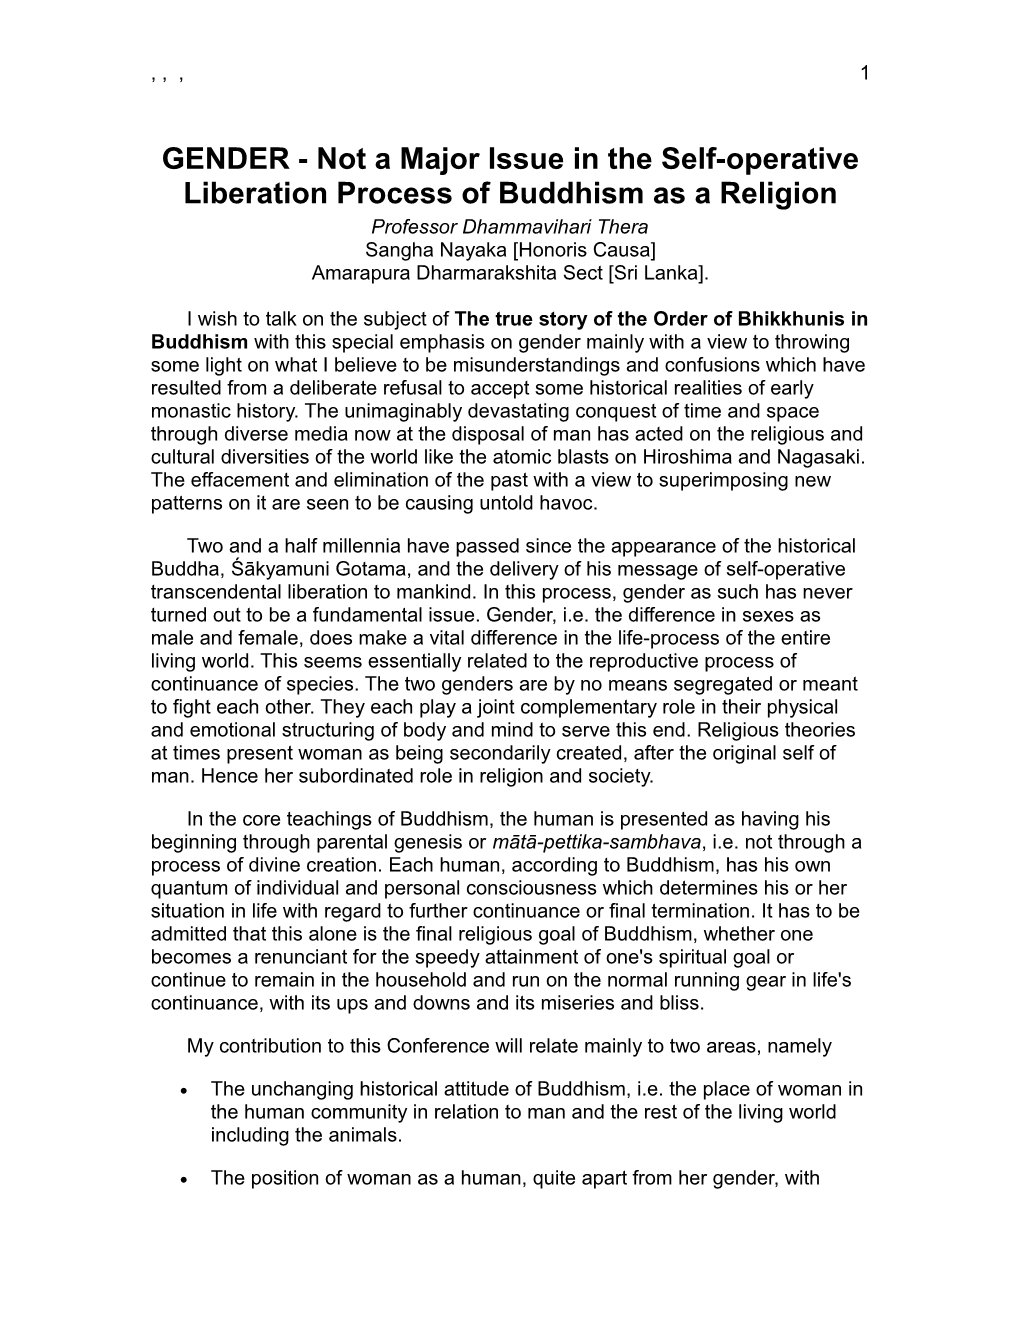 GENDER - Not a Major Issue in the Self-Operative Liberation Process of Buddhism As a Religion